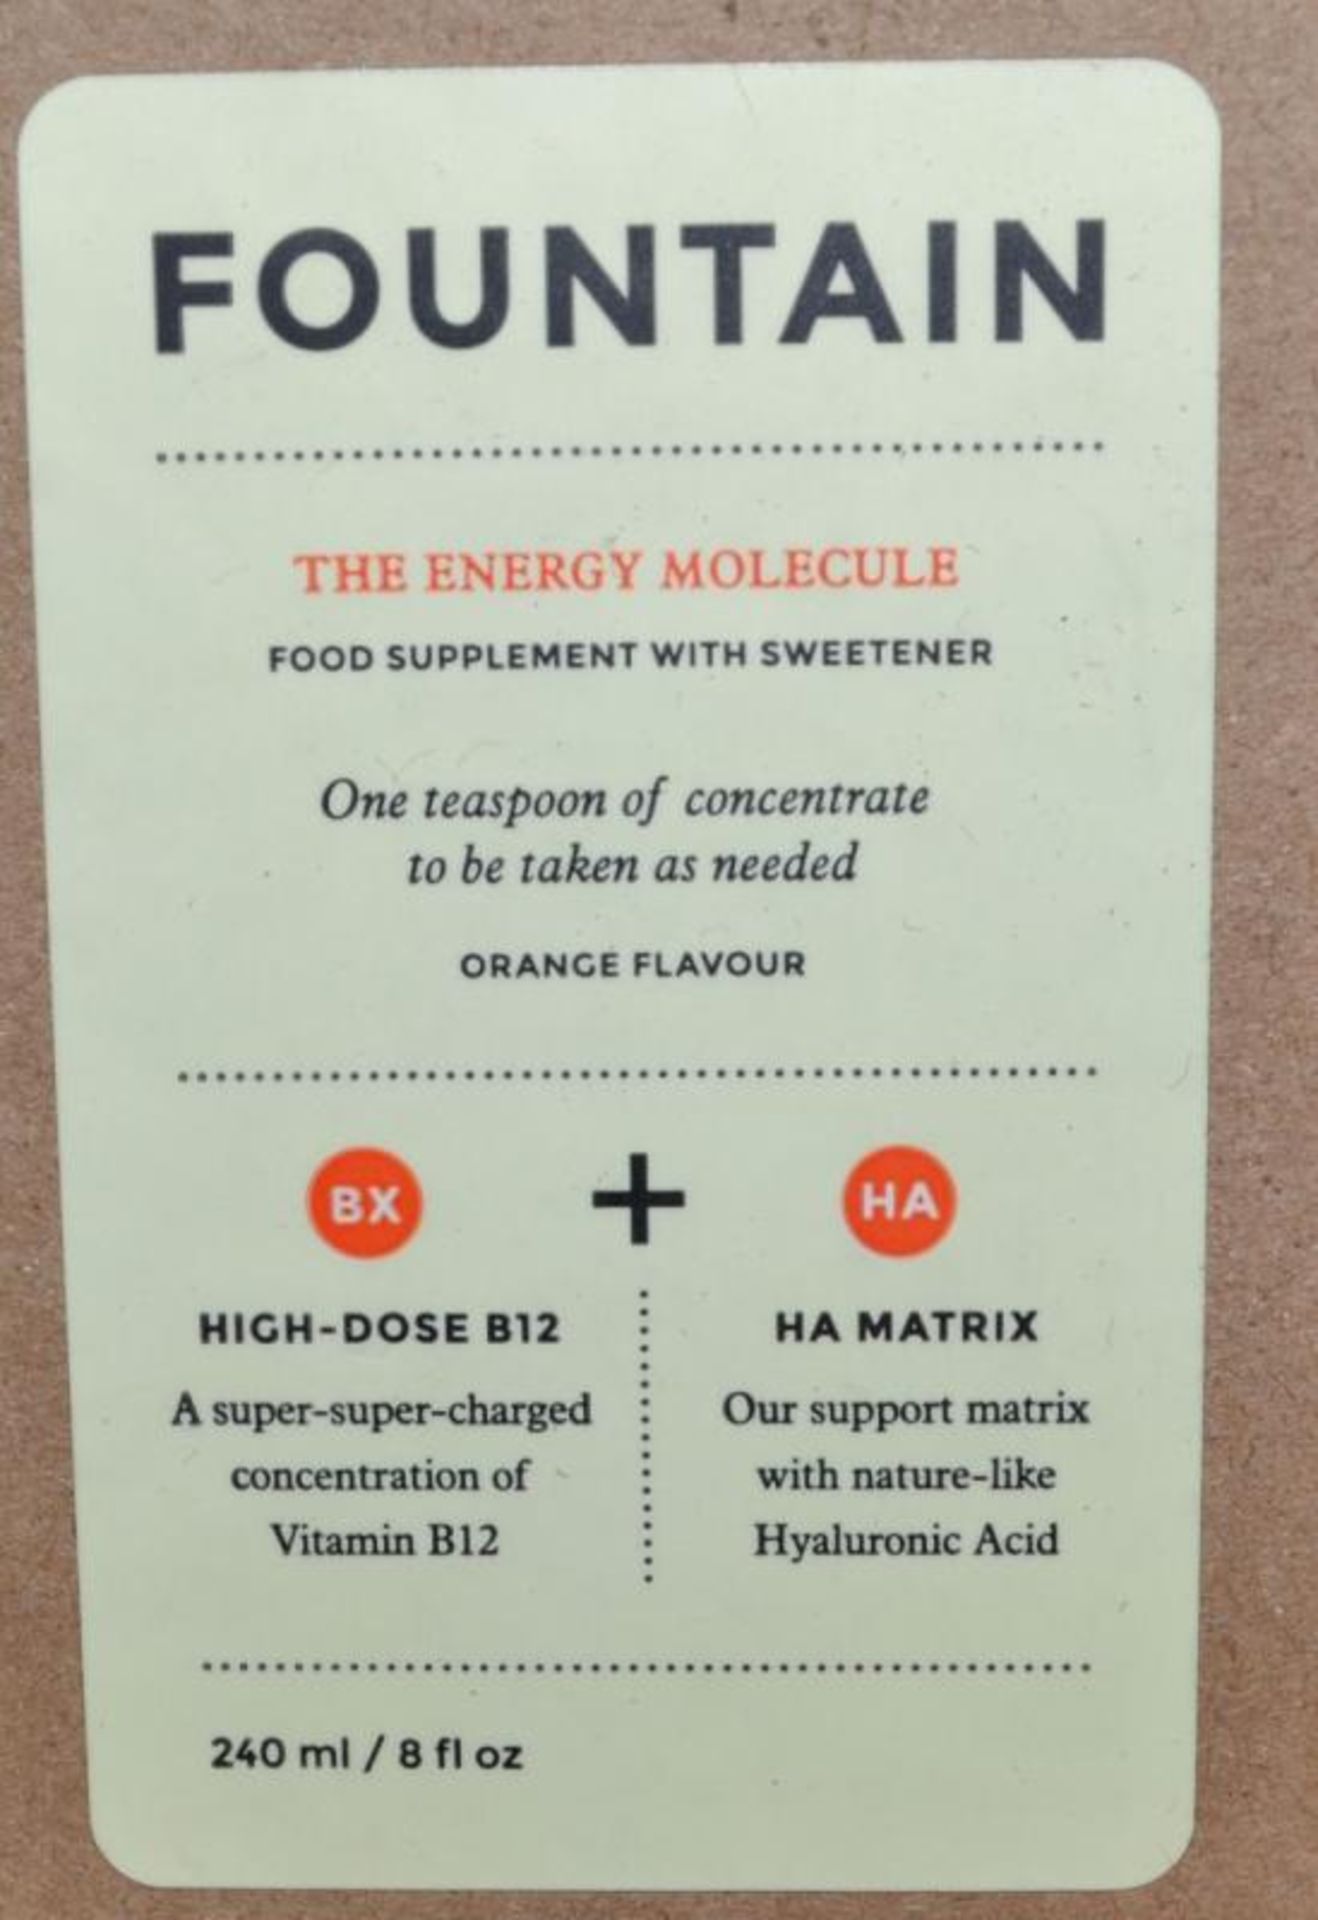 20 x 240ml Bottles of Fountain, The Energy Molecule Supplement - New & Boxed - CL185 - Ref: DRT0643 - Image 3 of 7